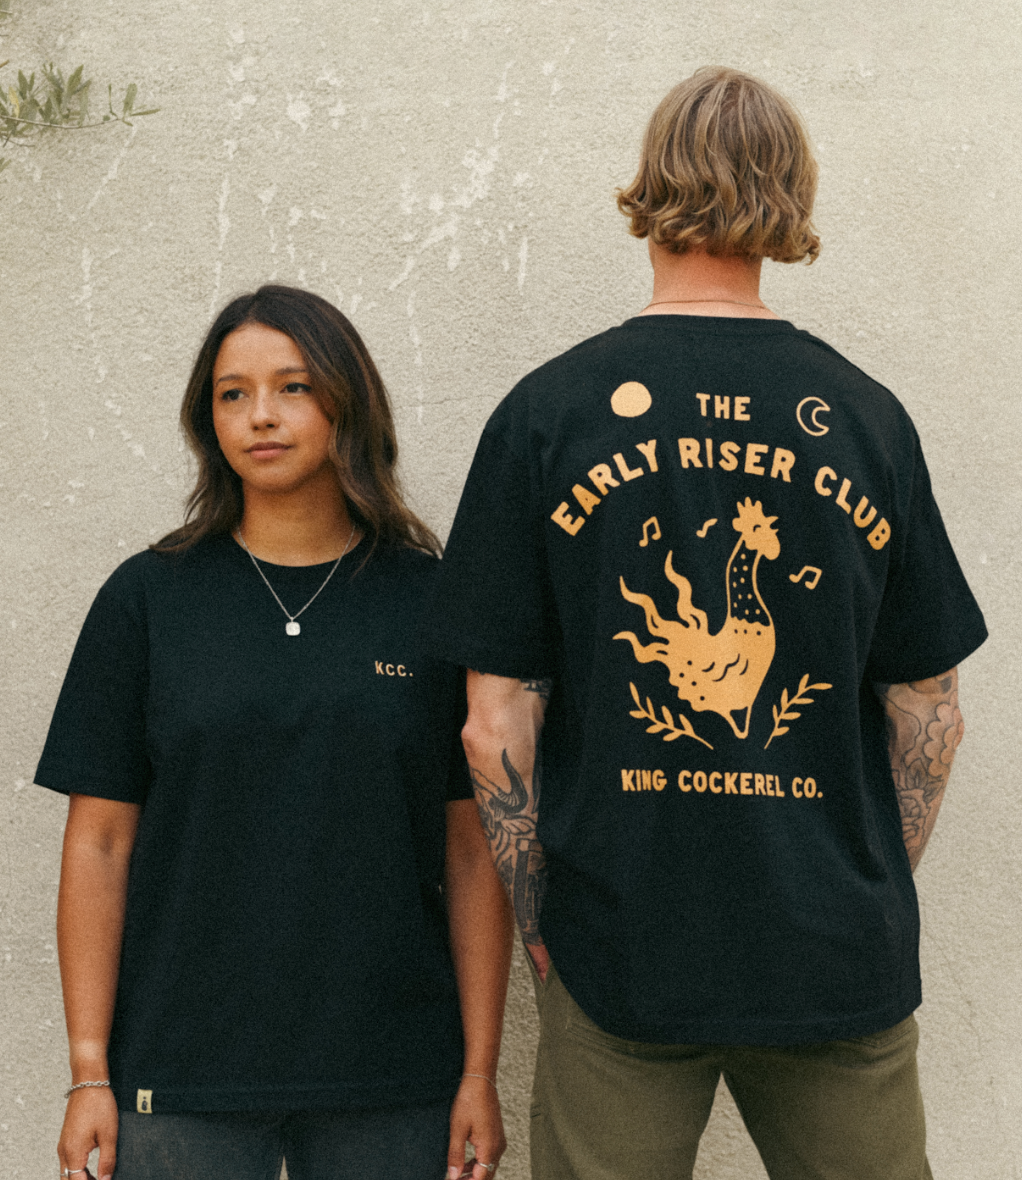 The Early Riser T-shirt